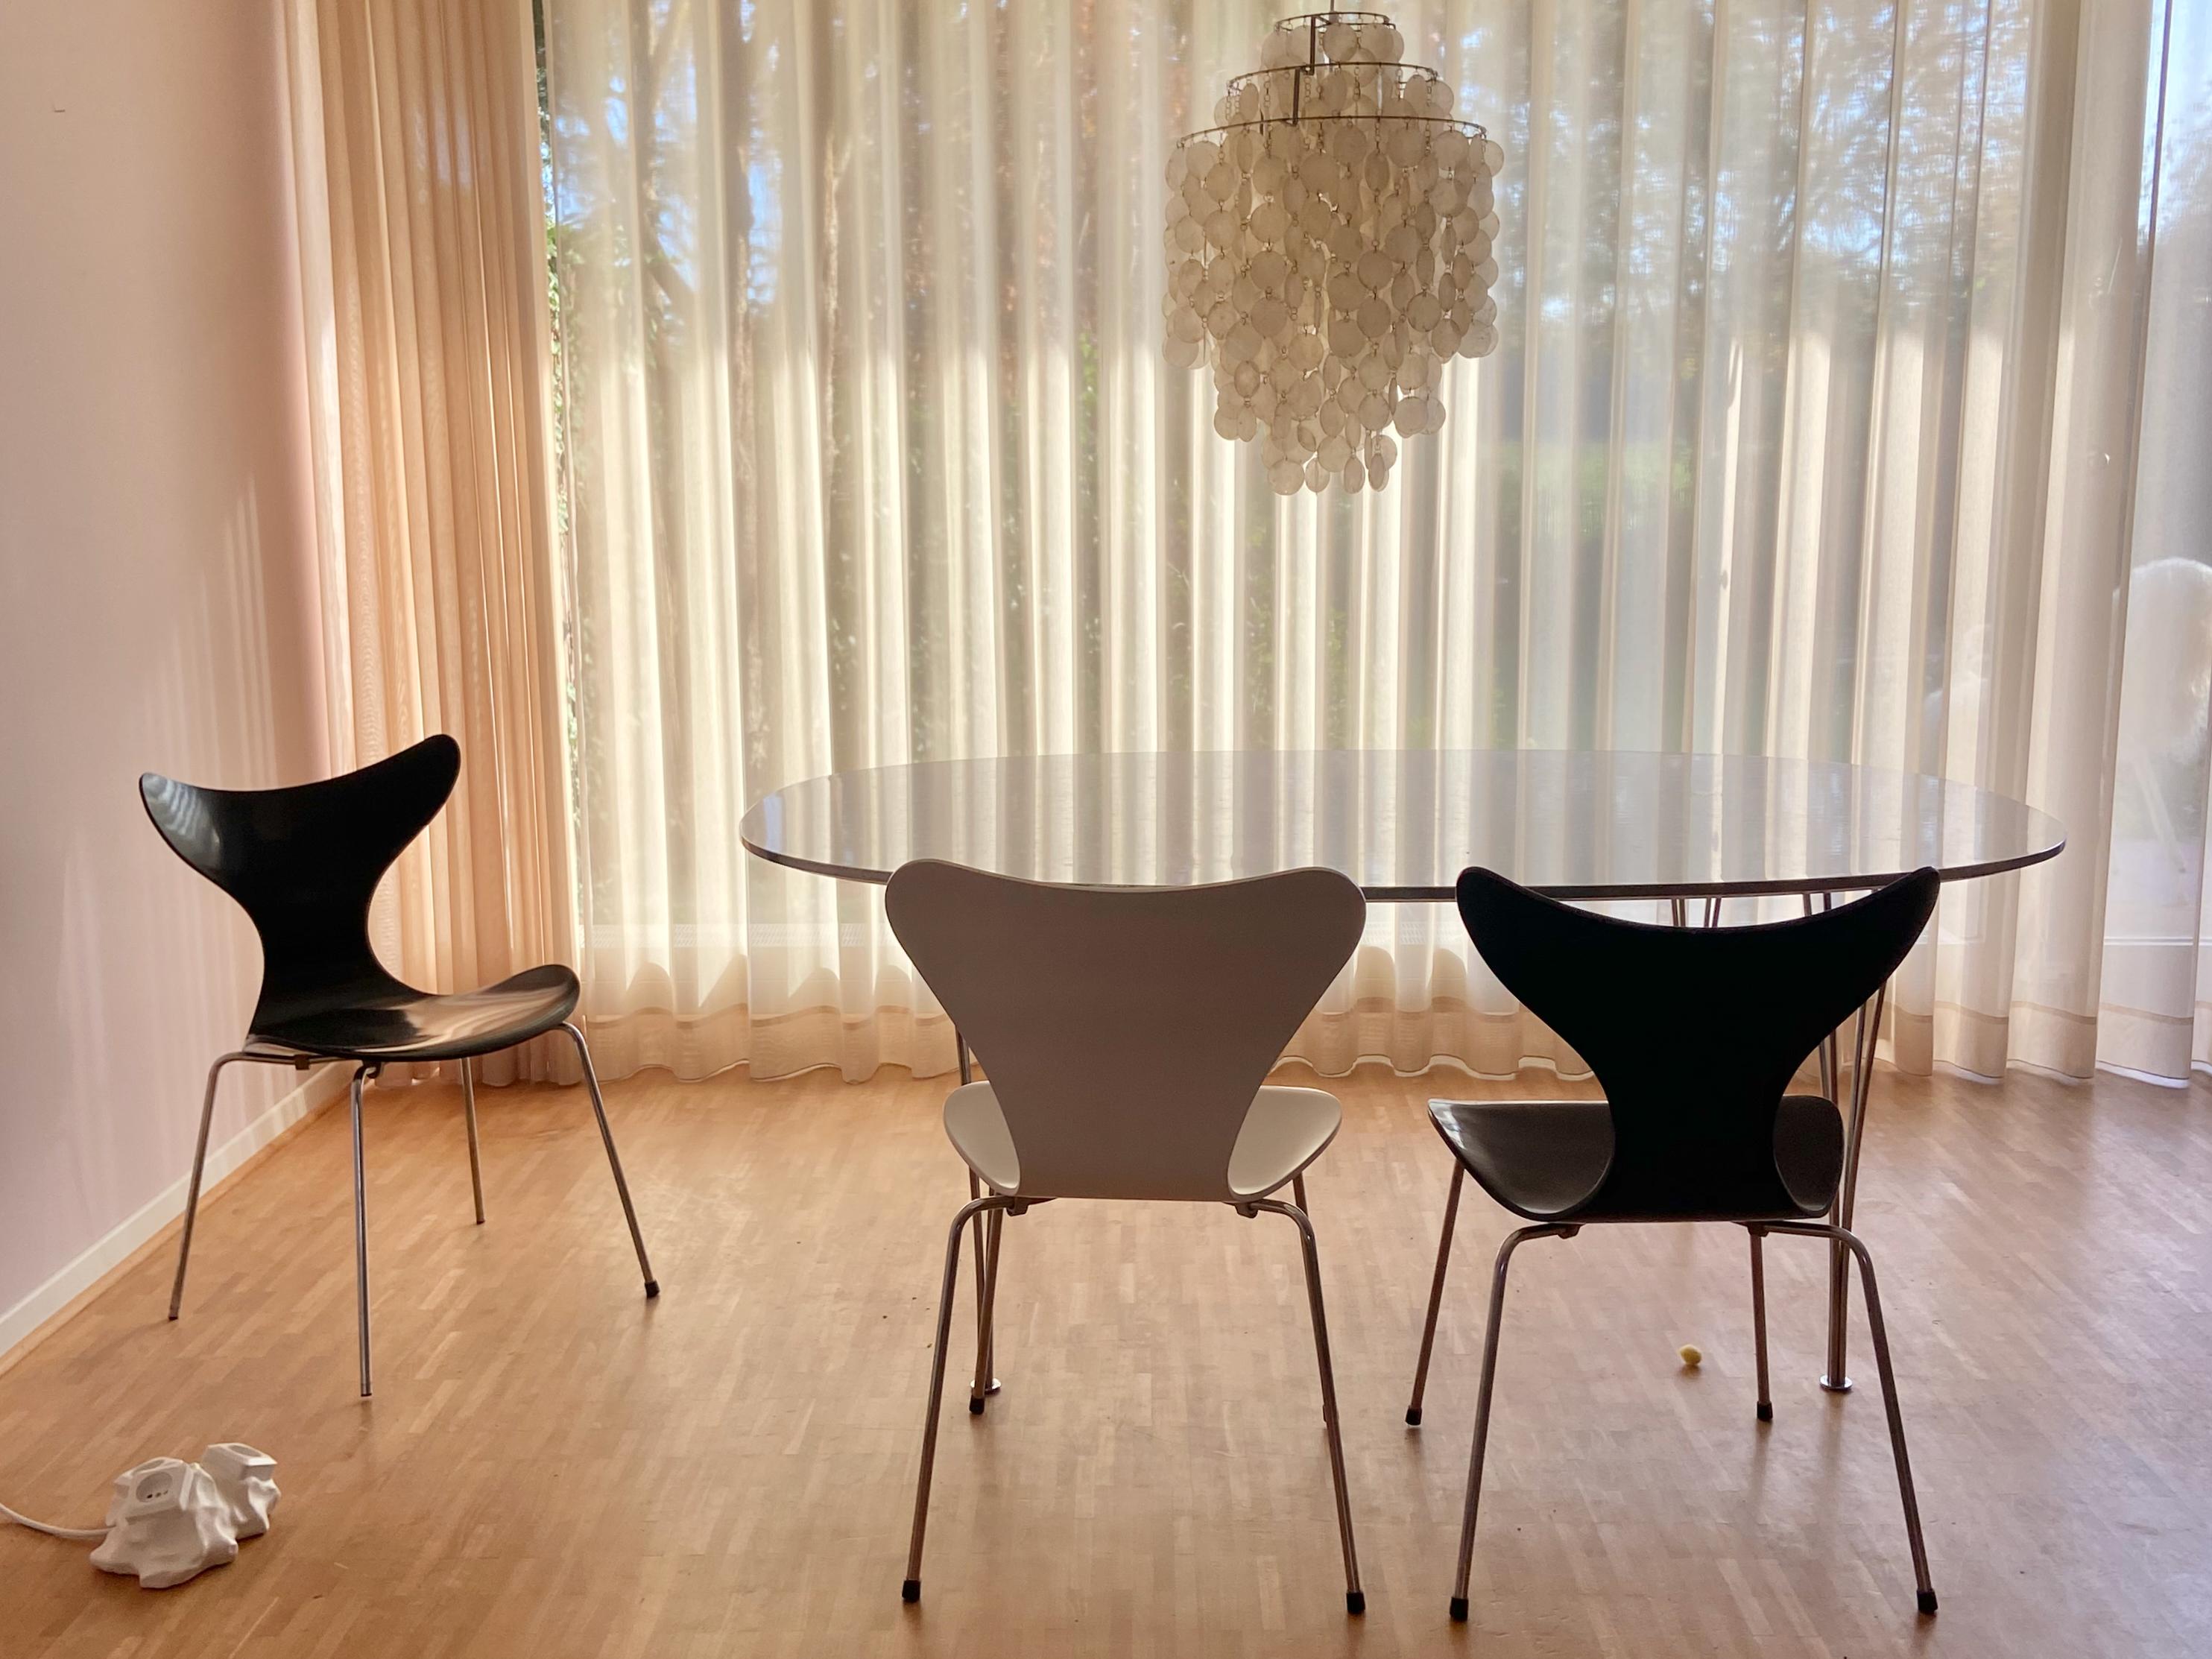 Rare mod. 3108 or Seagull dining chair by Arne Jacobsen for Fritz Hansen, Denmark. 
The FH3108 chair was designed for the National Bank of Denmark and was also the last design work from Arne Jacobsen. 

The chair is in original condition, no